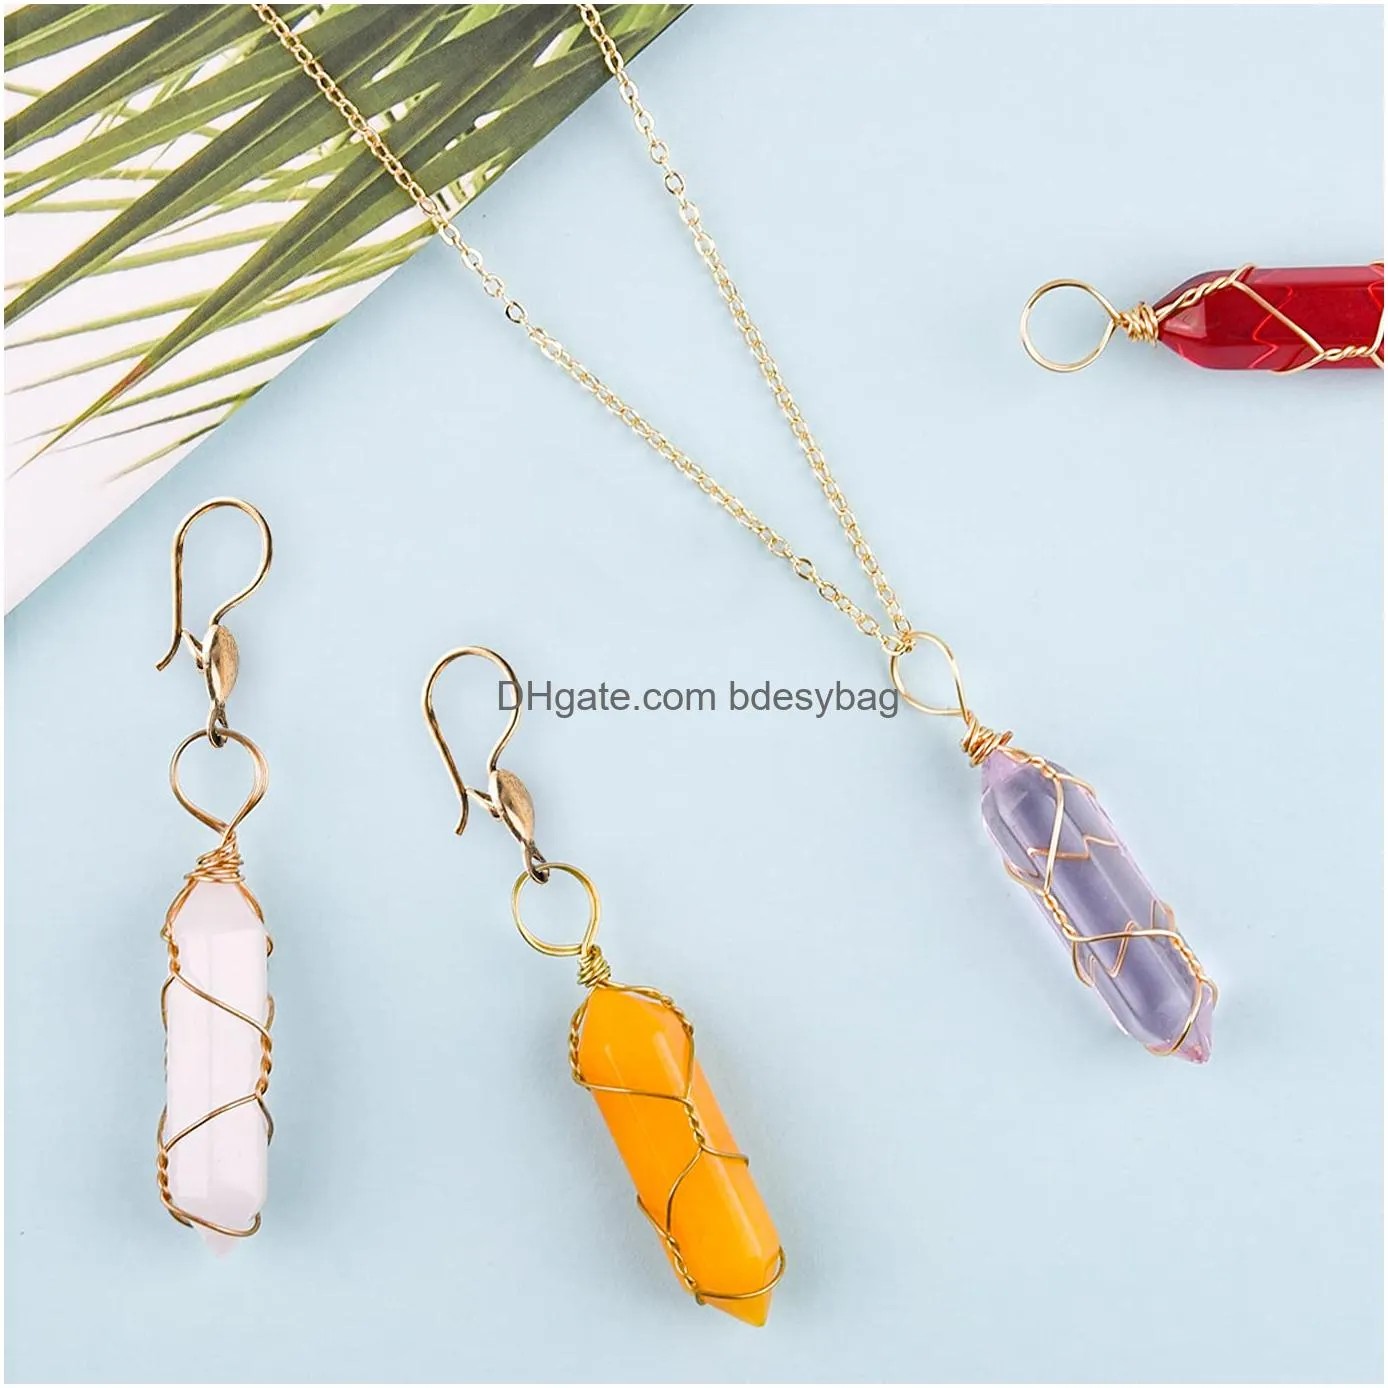 wxj13 hexagonal healing crystal natural crystal quartz pendant tree life wire wrapped gemstone pendant for necklace jewelry making for meditation crystal therapy